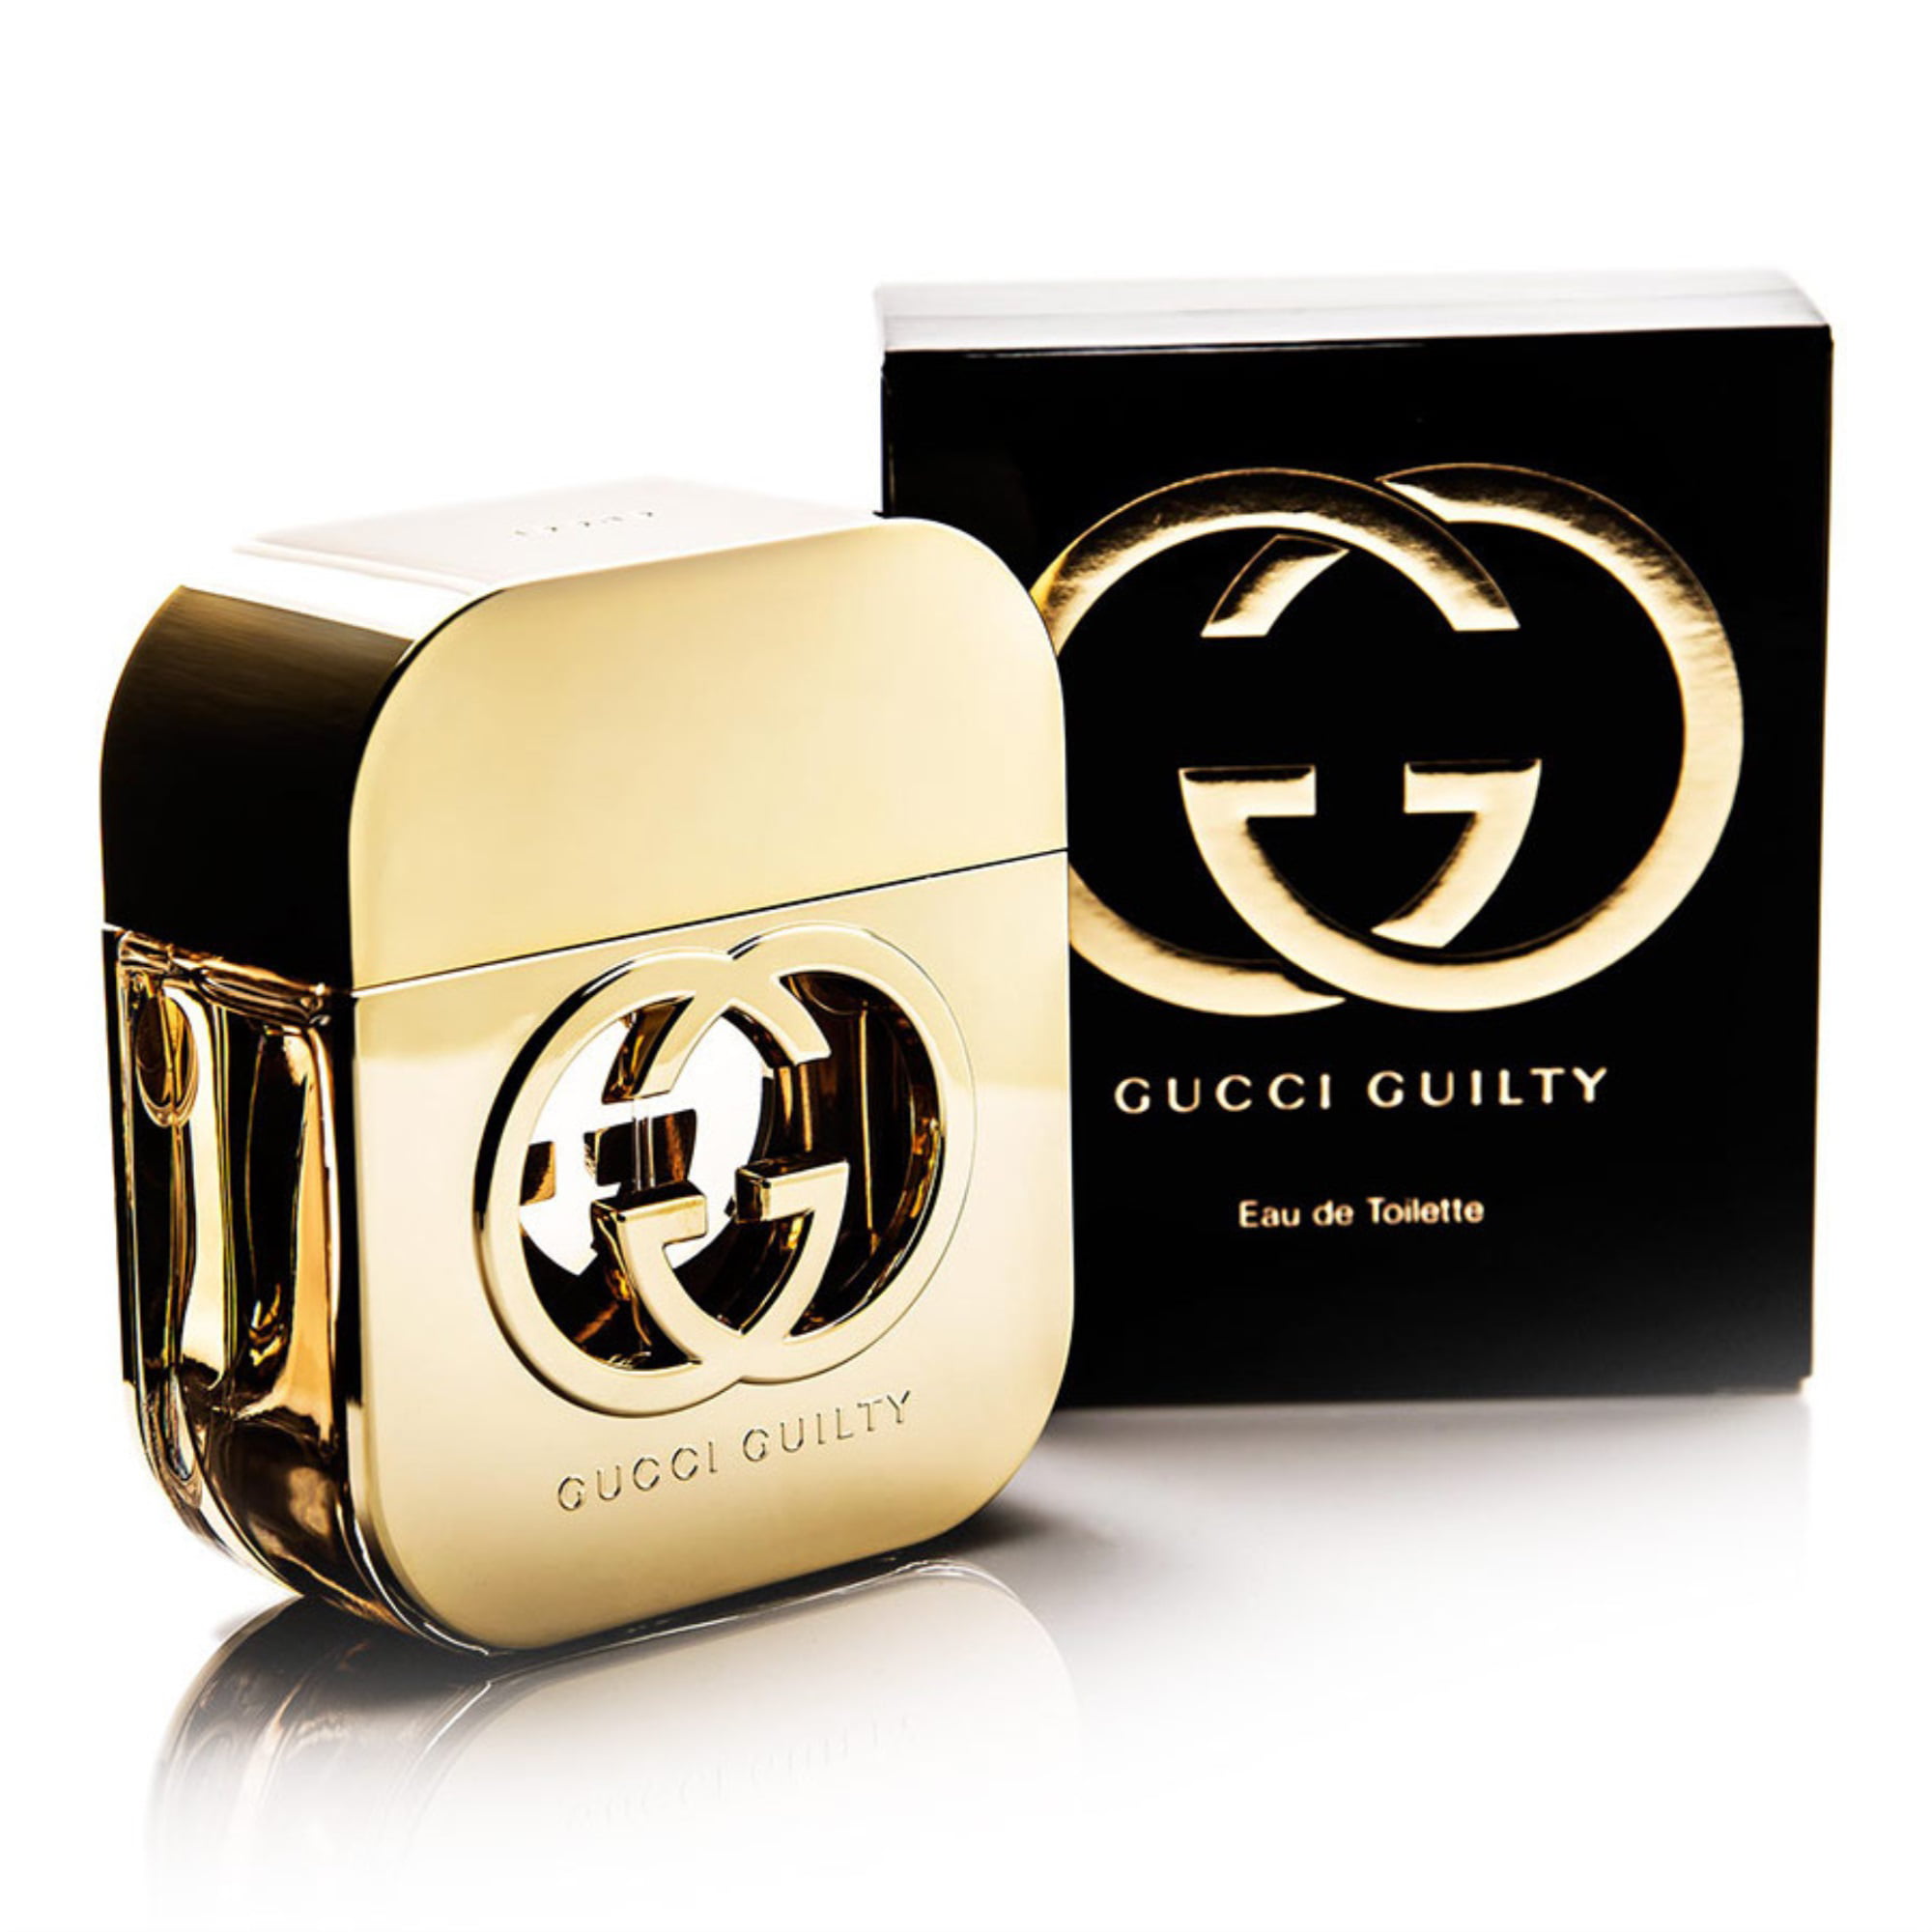 gucci guilty intense for her